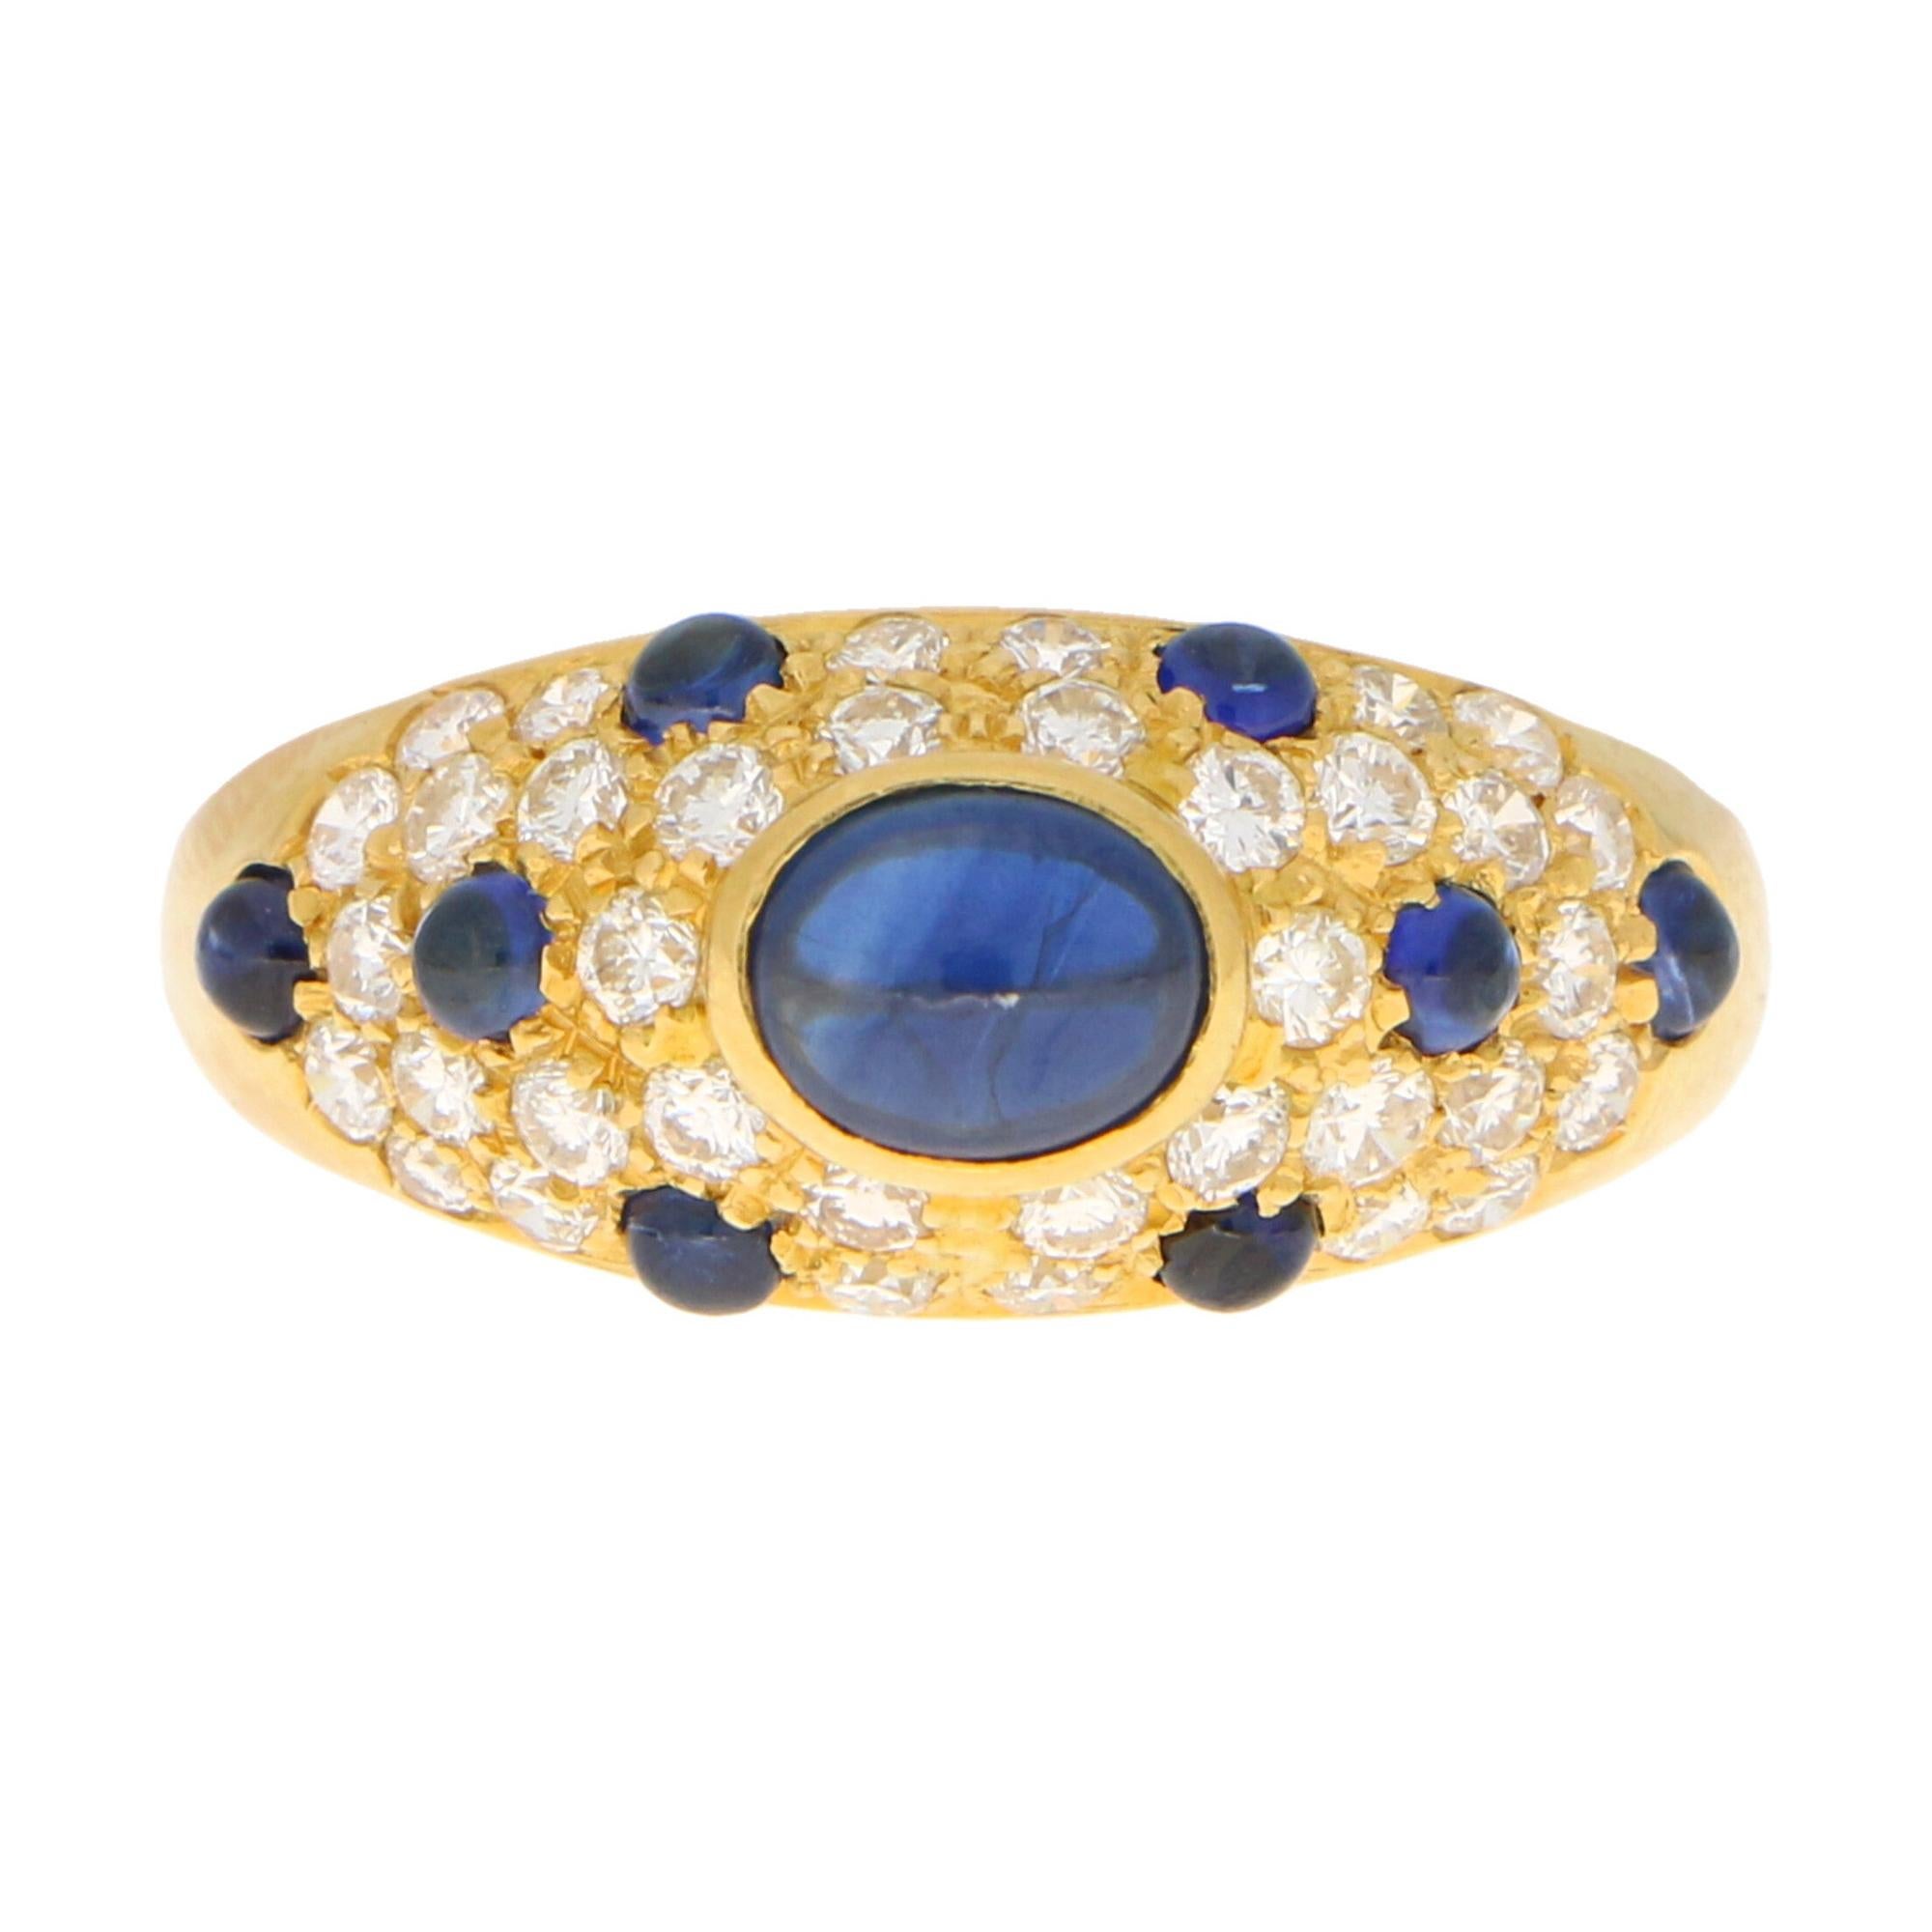 Vintage Cartier Sapphire and Diamond Dome Bombe Ring Set in 18k Yellow Gold